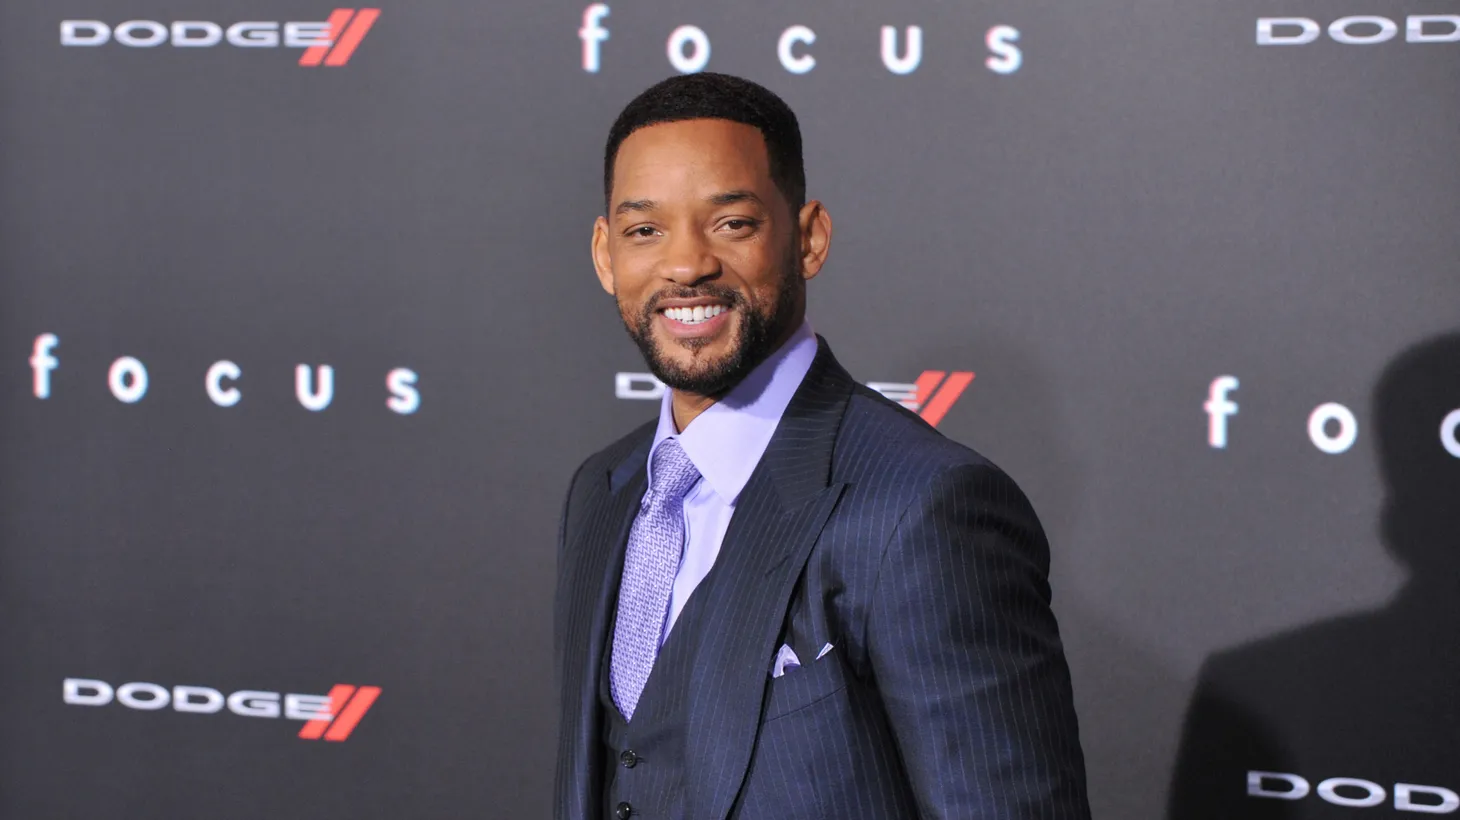 Will Smith has faced public criticism after slapping Chris Rock at the Oscars, and he could soon face real repercussions from the Academy of Motion Picture Arts.